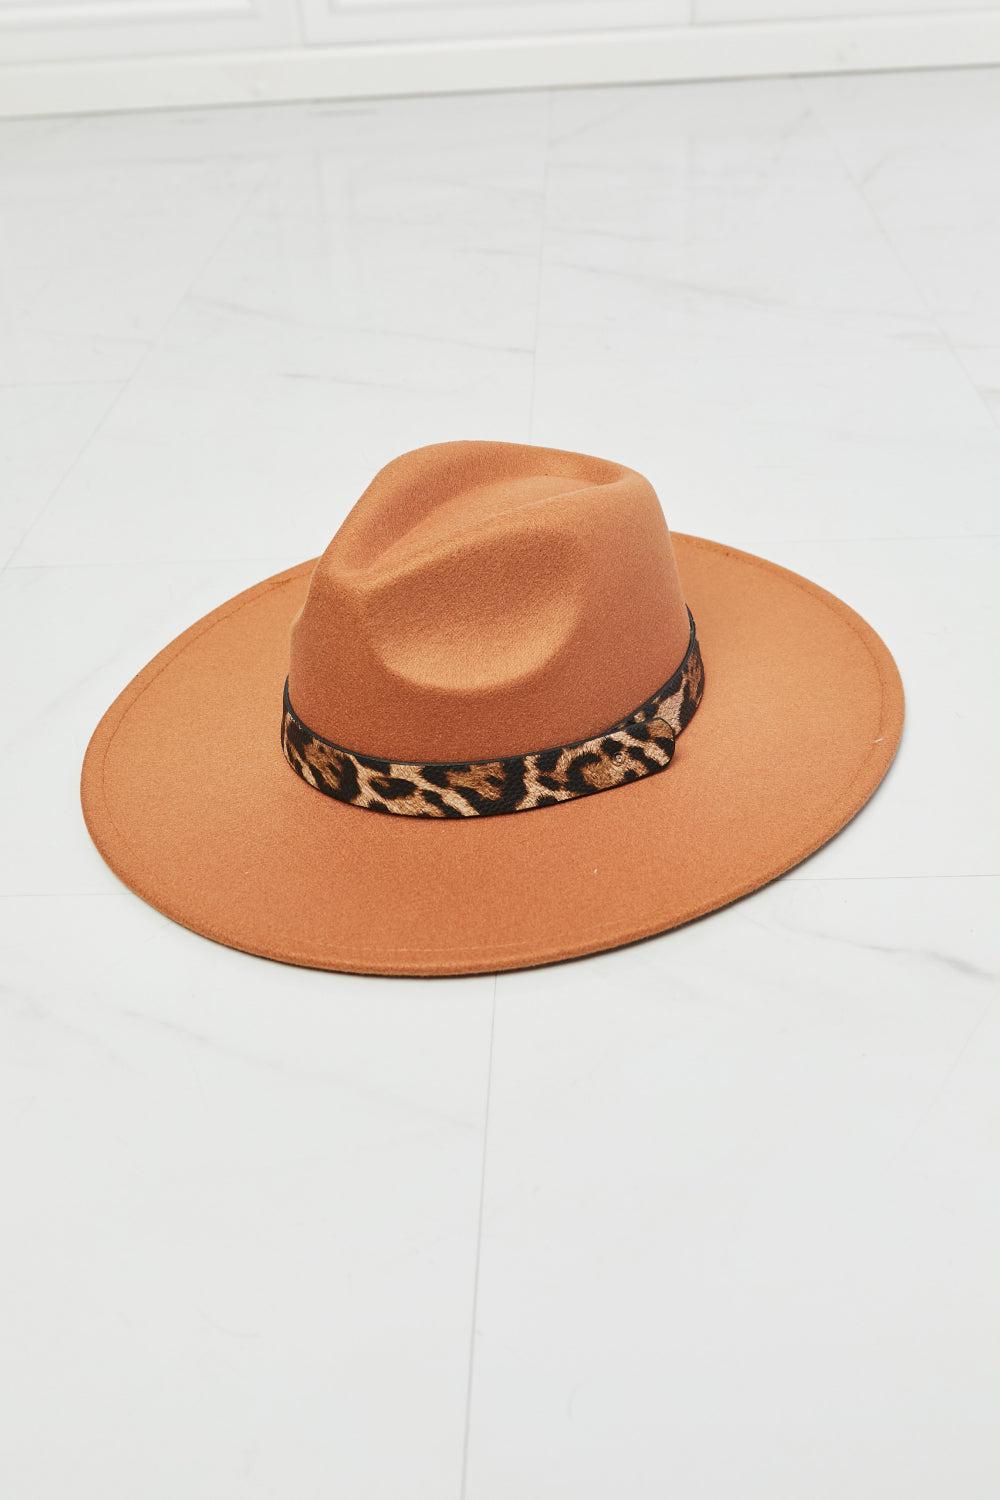 Fame In The Wild Leopard Detail Fedora Hat BLUE ZONE PLANET